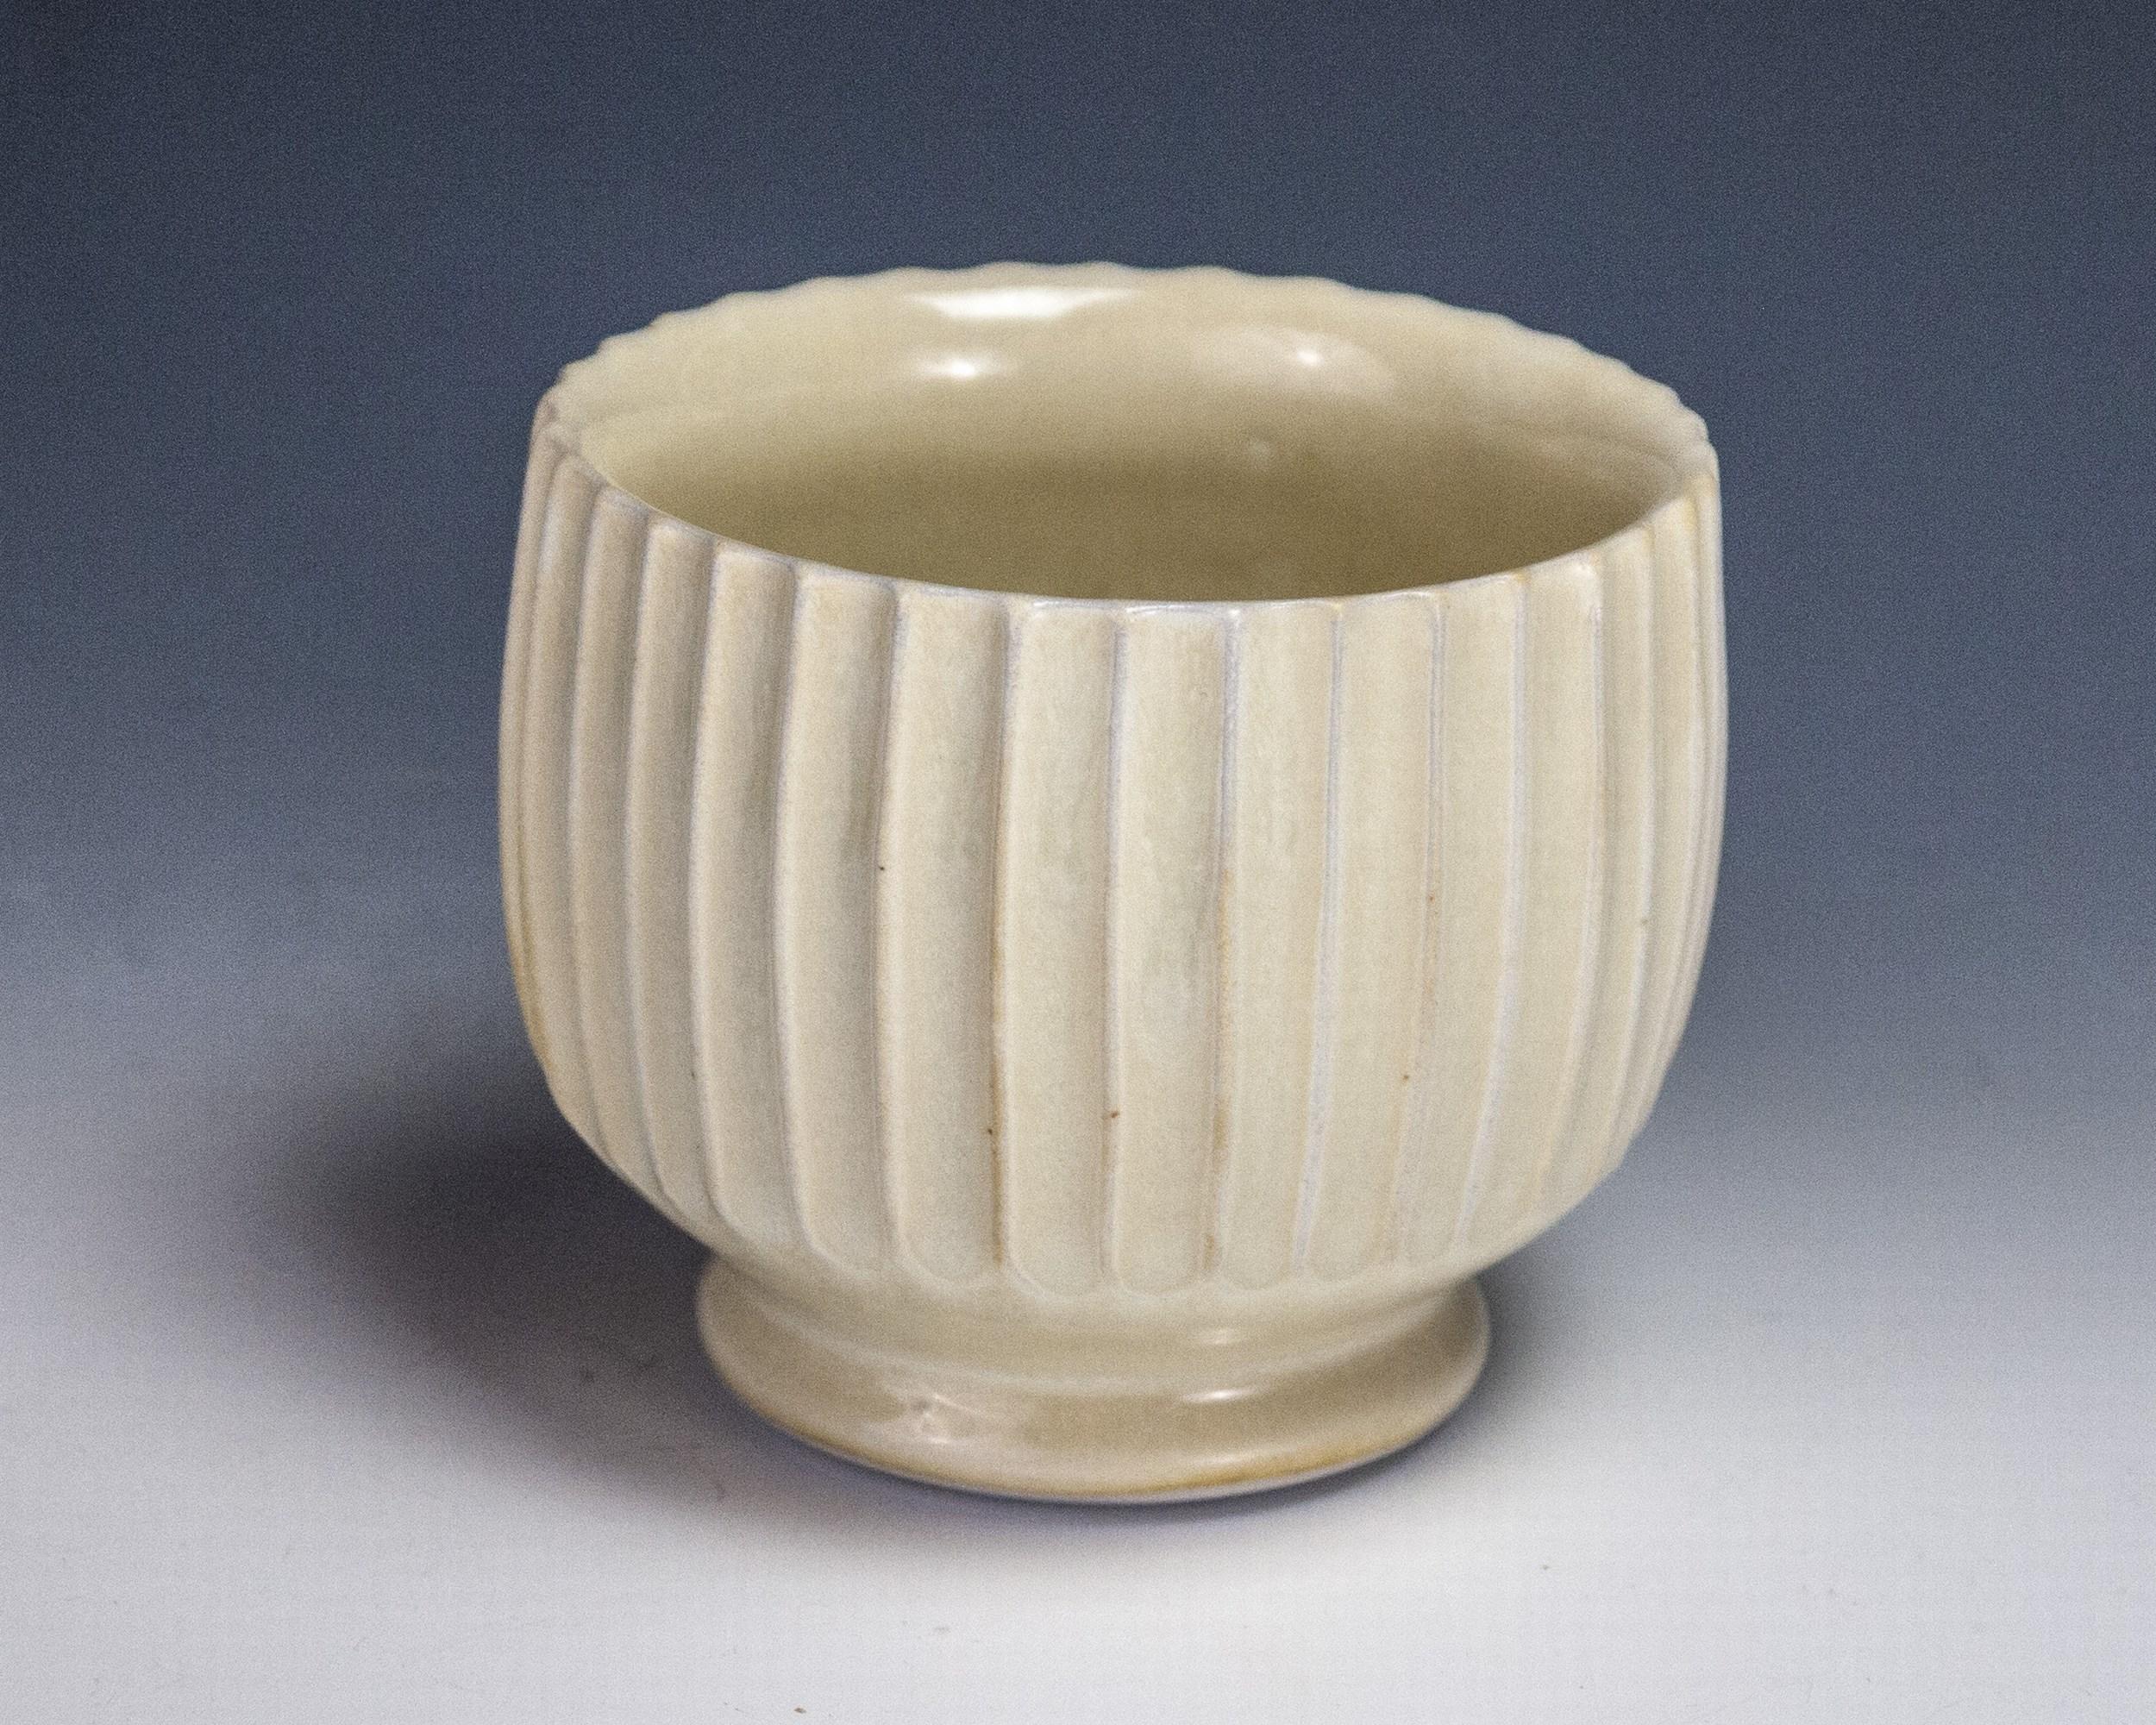 Carved Yellow Cup - Art by Steven Young Lee